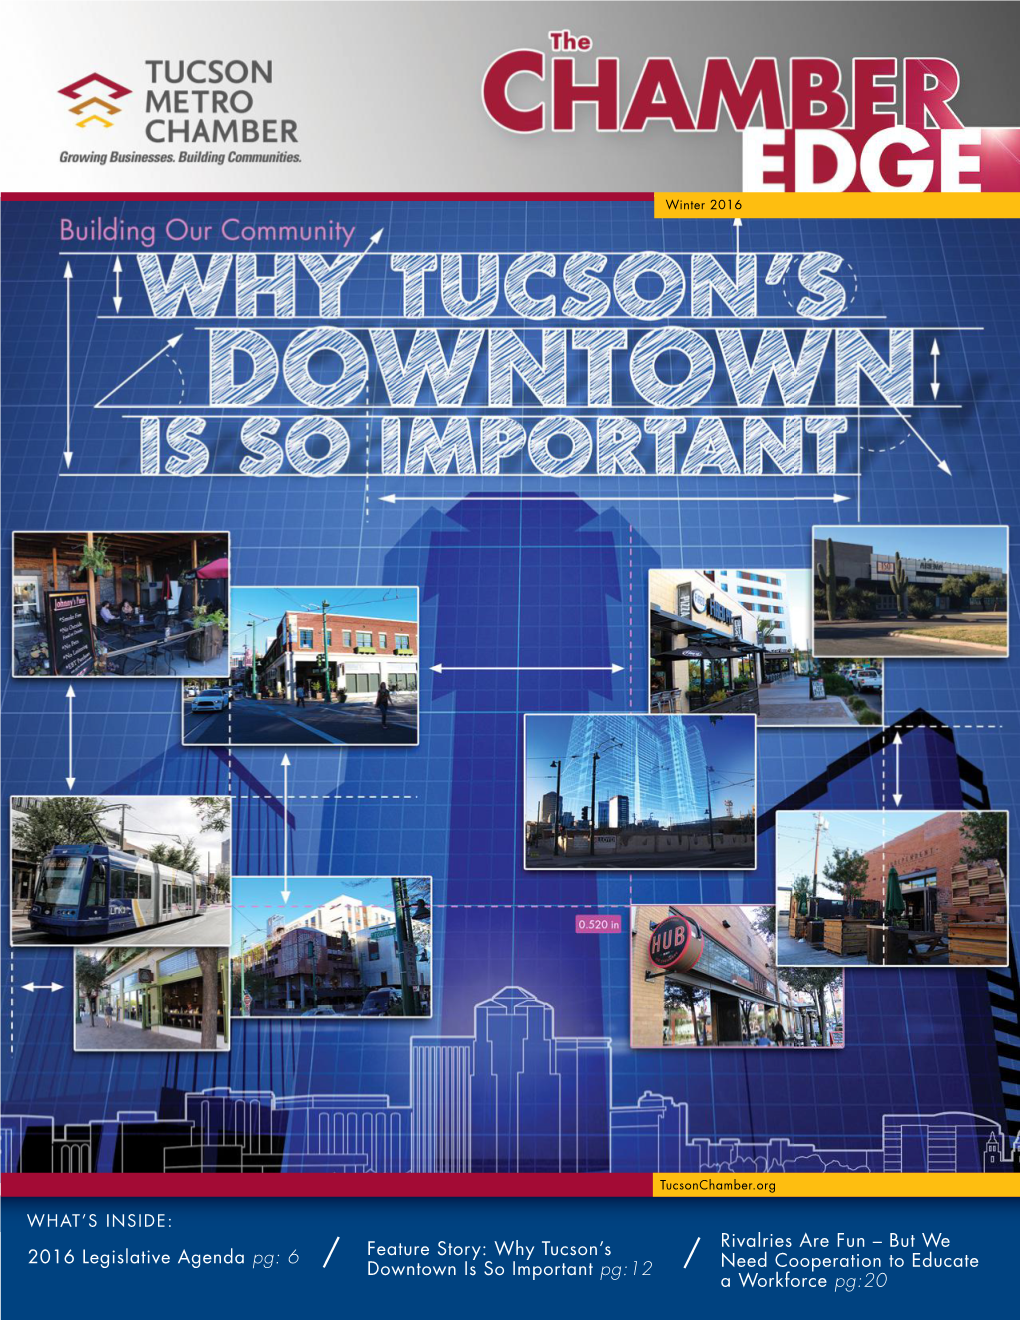 Why Tucson's Downtown Is So Important Pg:12 Rivalries Are